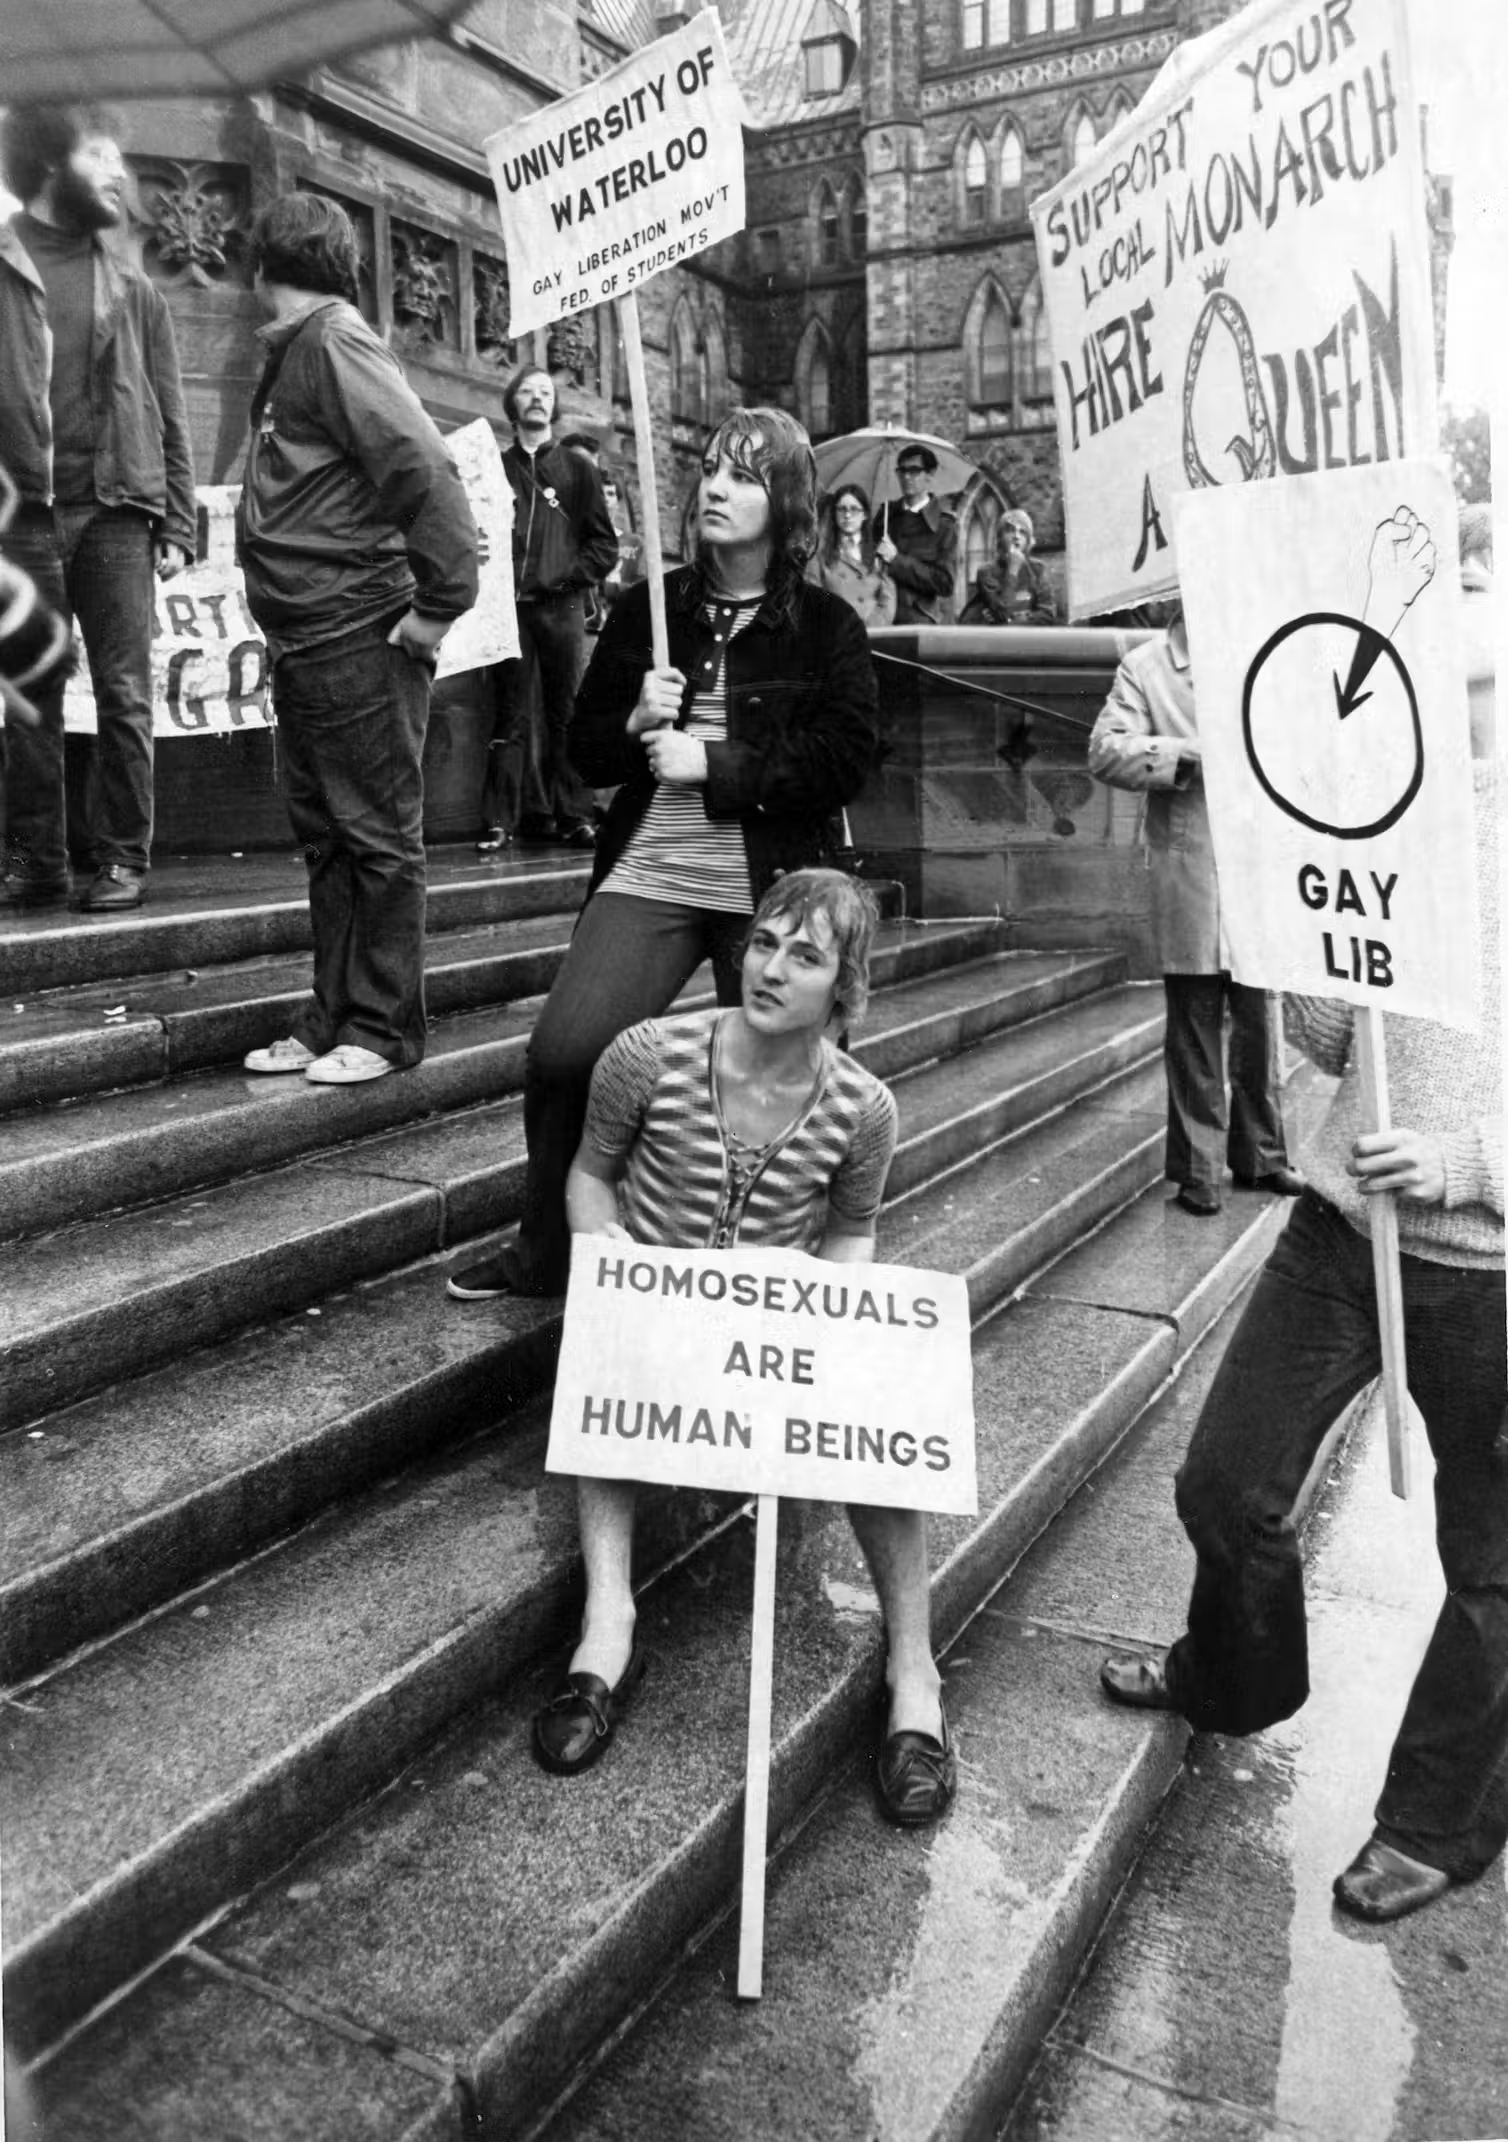 A black and white photo of people protesting on building steps. One placard reads: homosexuals are human beings.